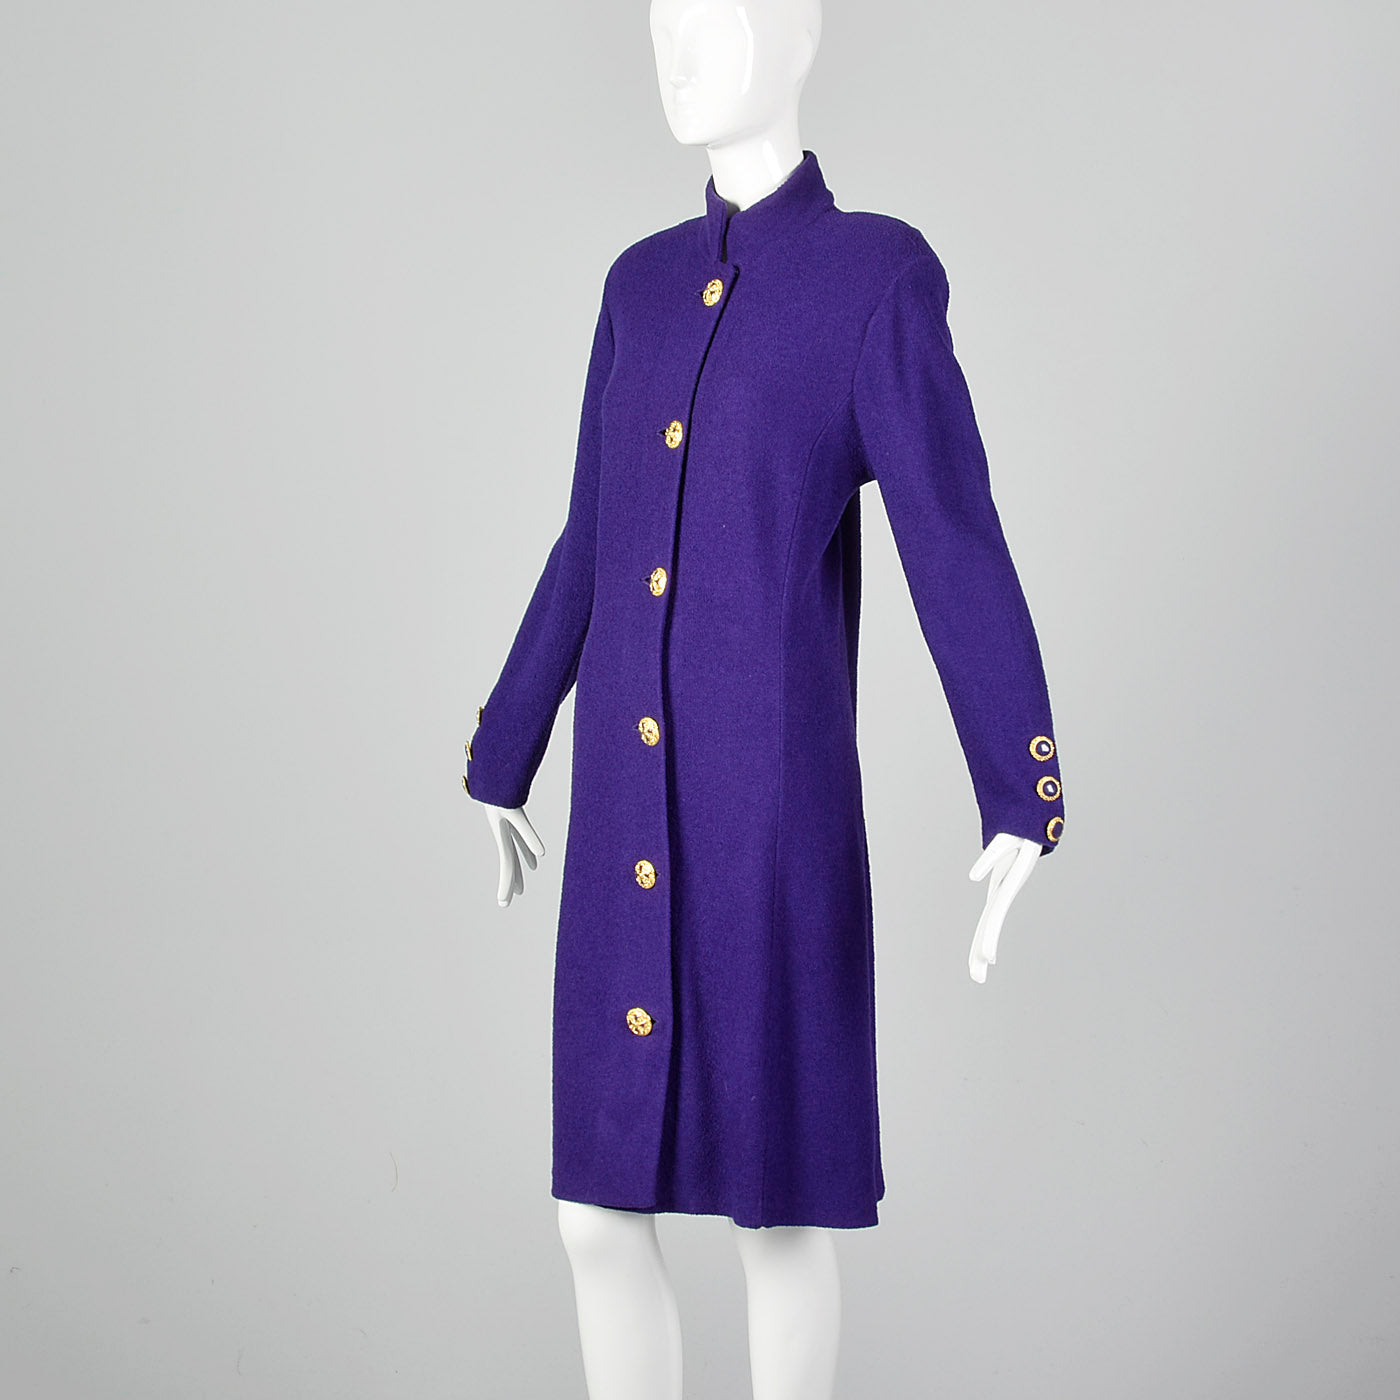 1980s St John Purple Knit Dress with Shoulder Pads and Gold Button Front